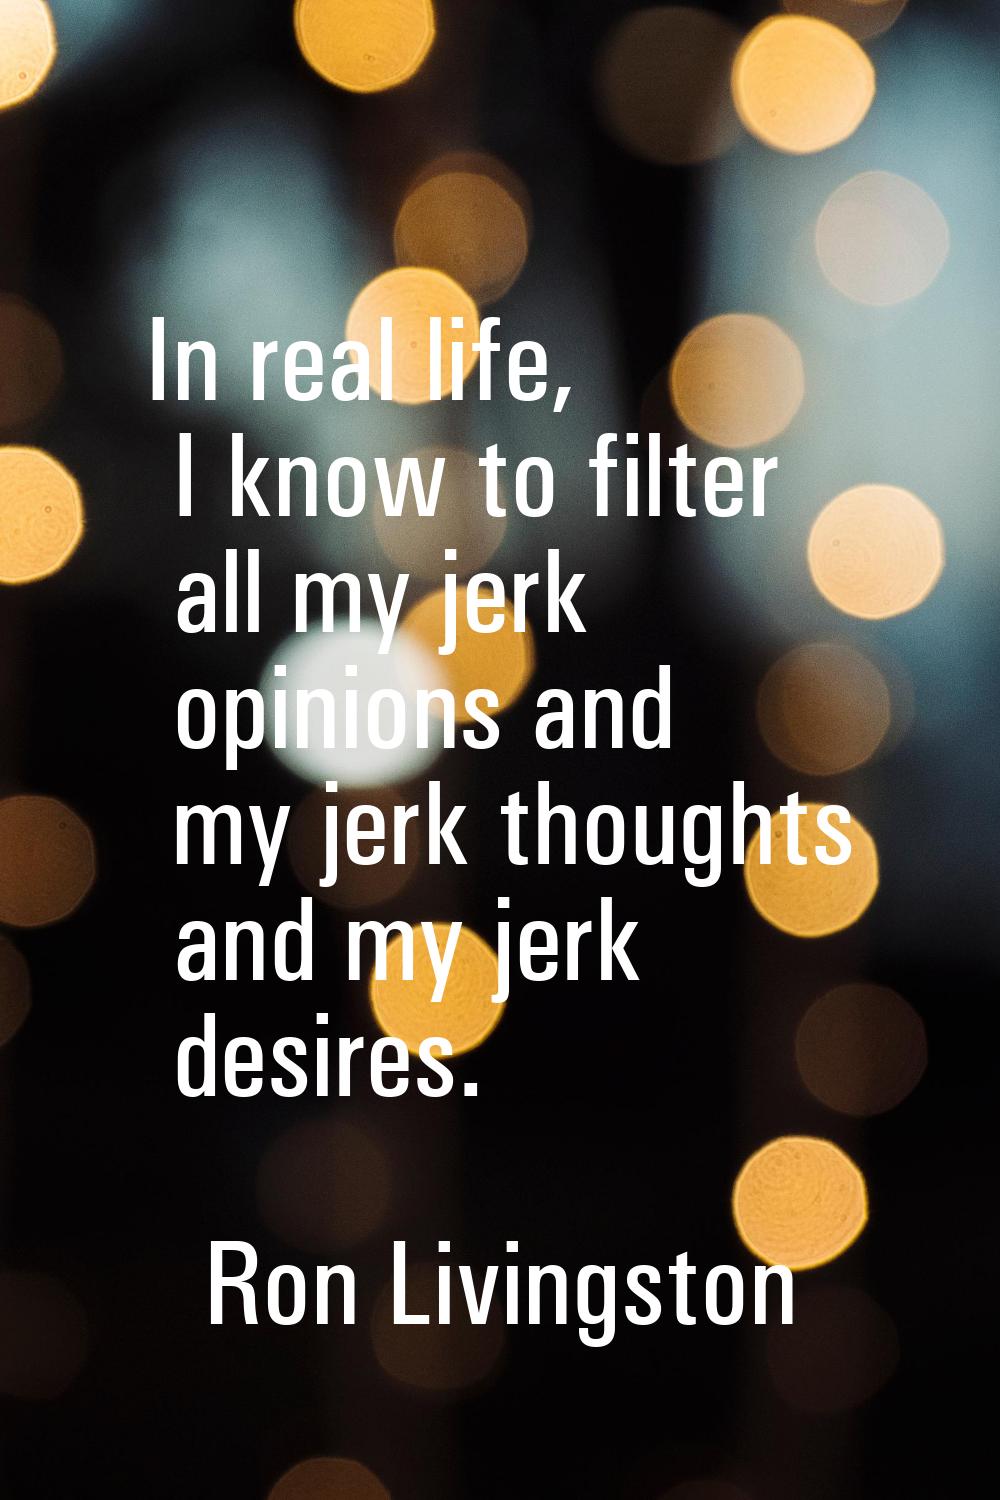 In real life, I know to filter all my jerk opinions and my jerk thoughts and my jerk desires.